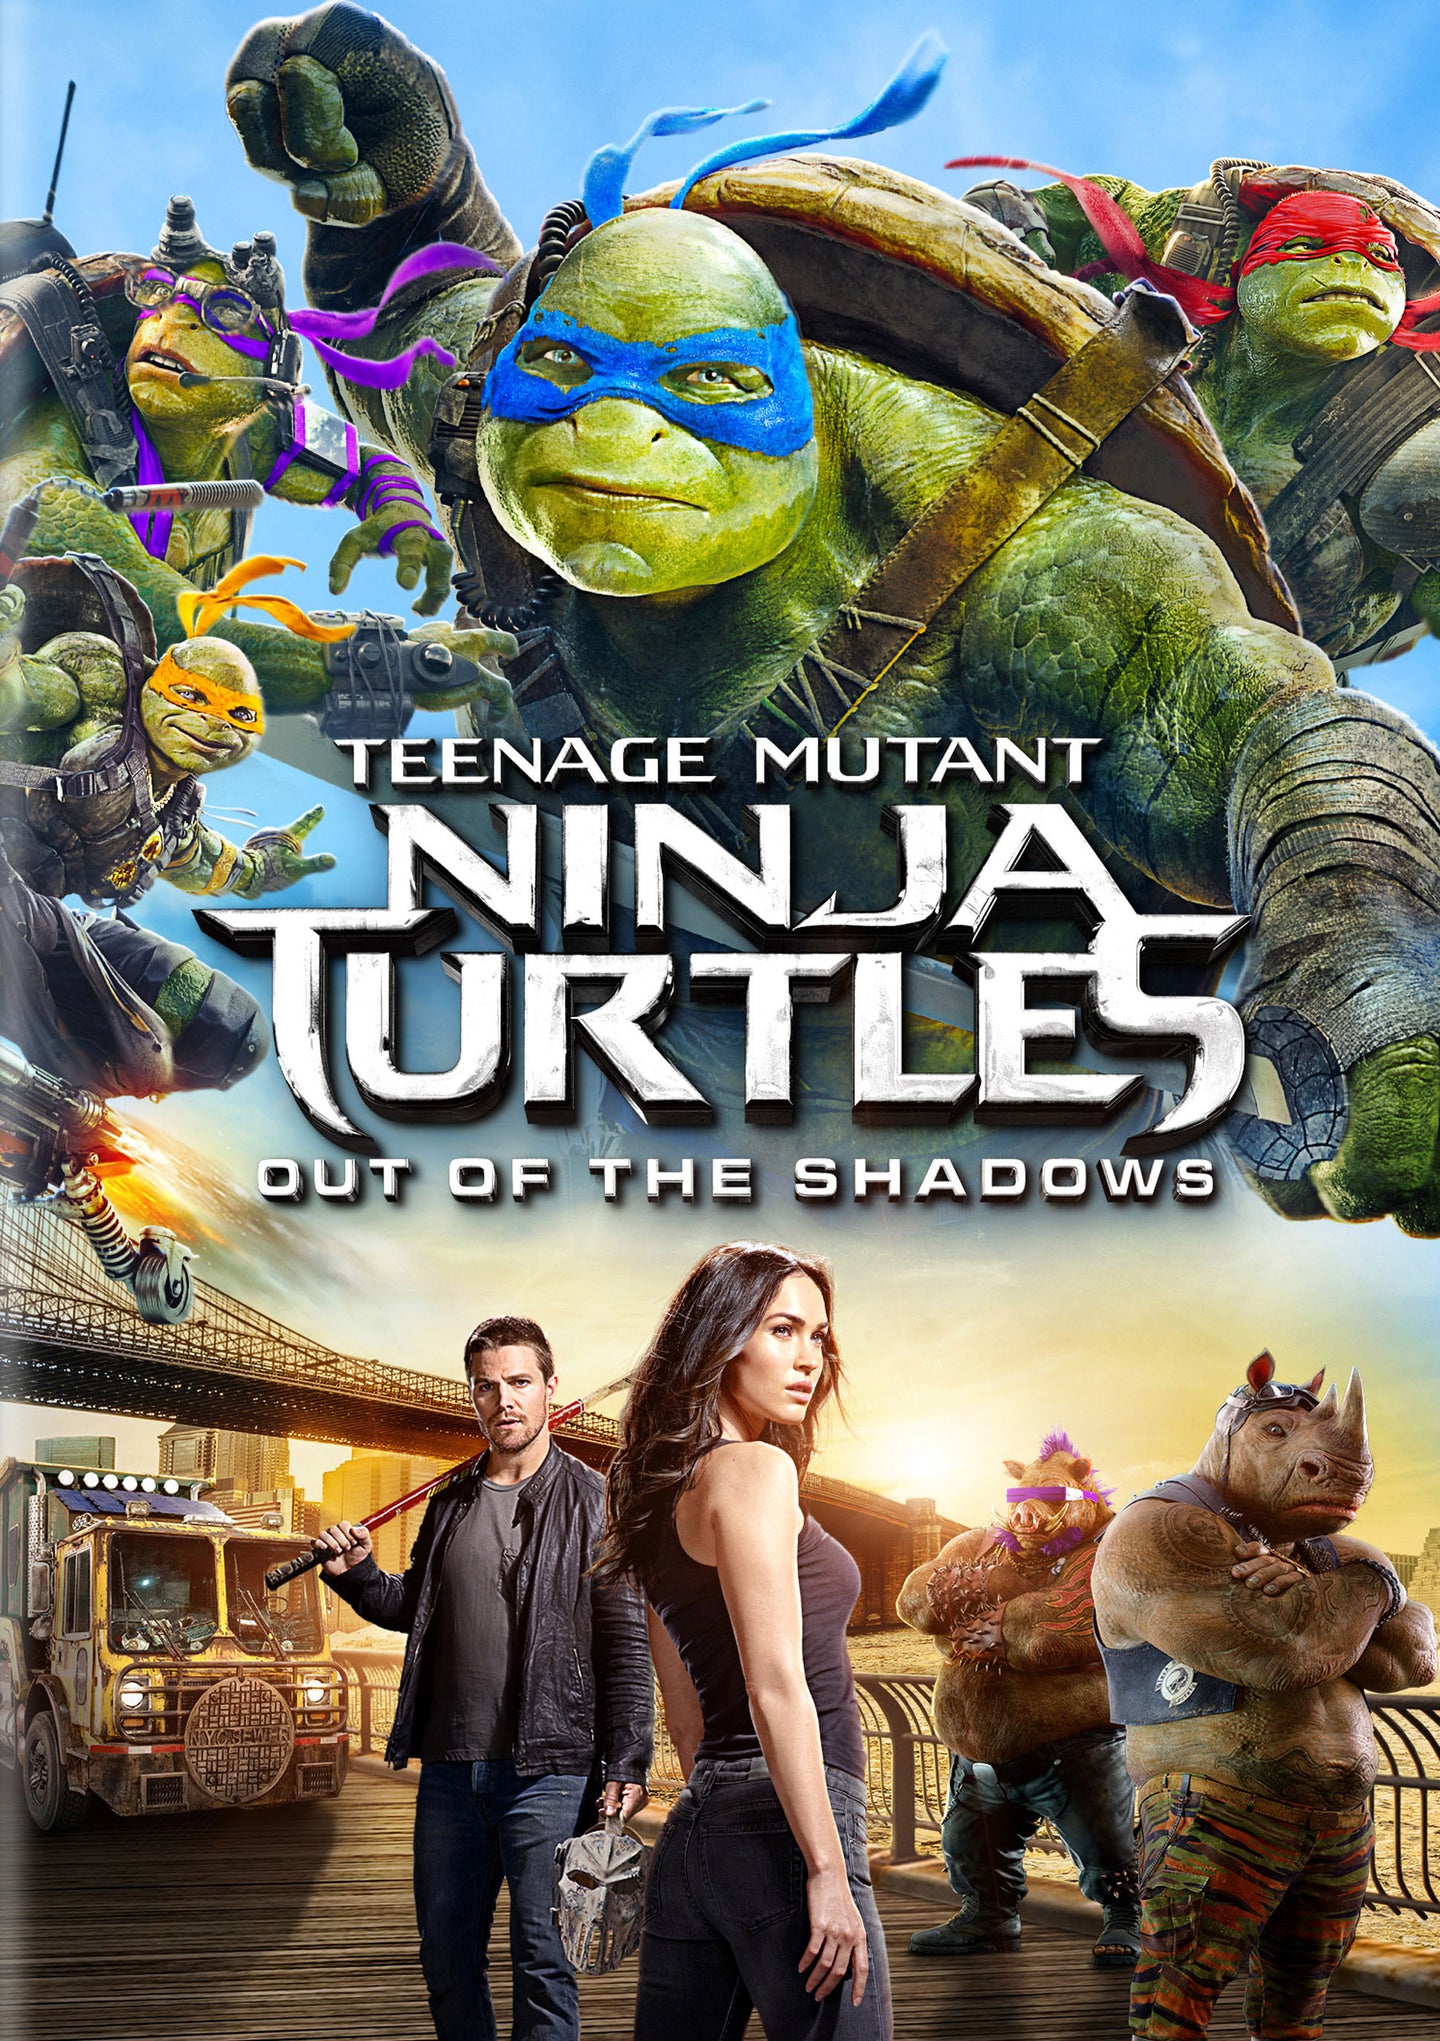 Teenage Mutant Ninja Turtles: Out Of The Shadows (2016) Vudu HD redemption only